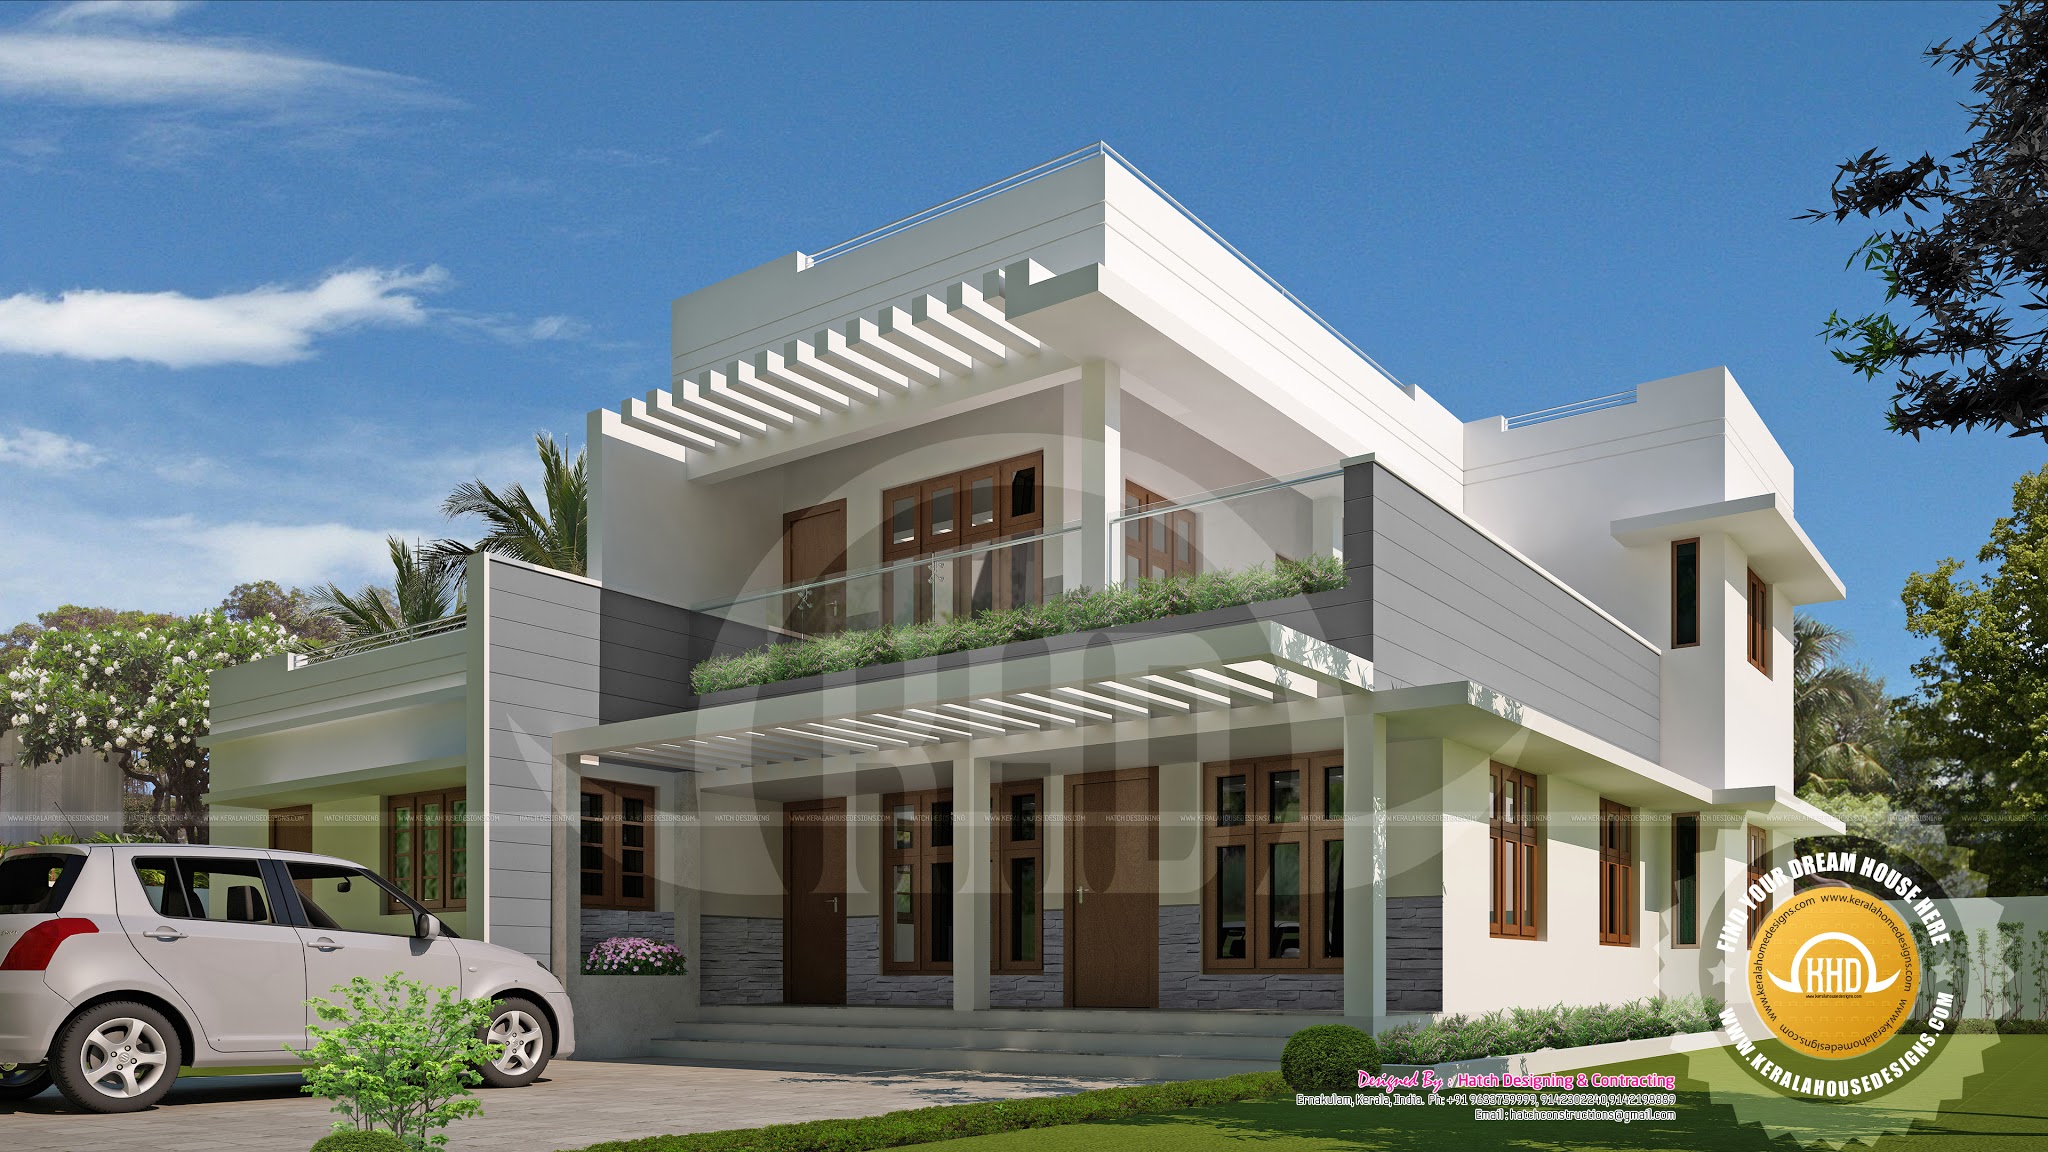  Contemporary  mix 5  bedroom  house  Kerala home  design and 